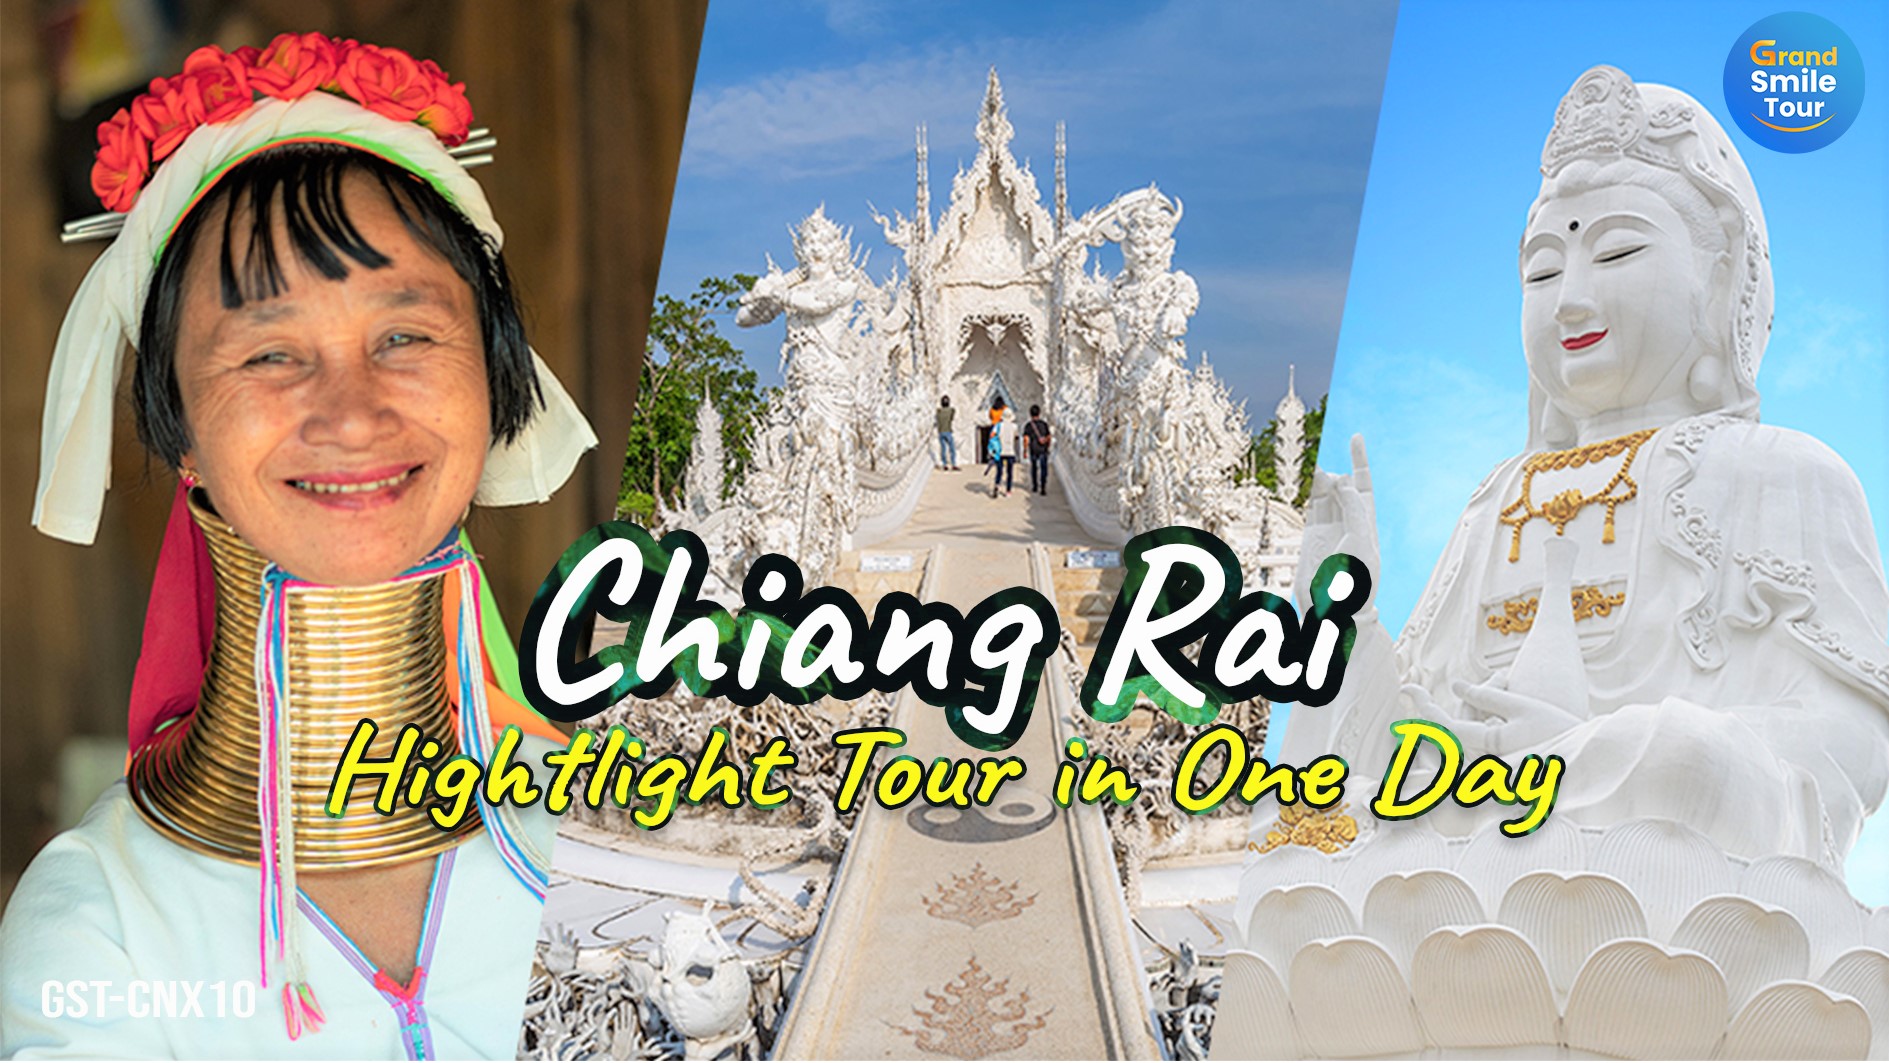 GST-CNX10 Chiang Rai Hightlight Tour in One Day